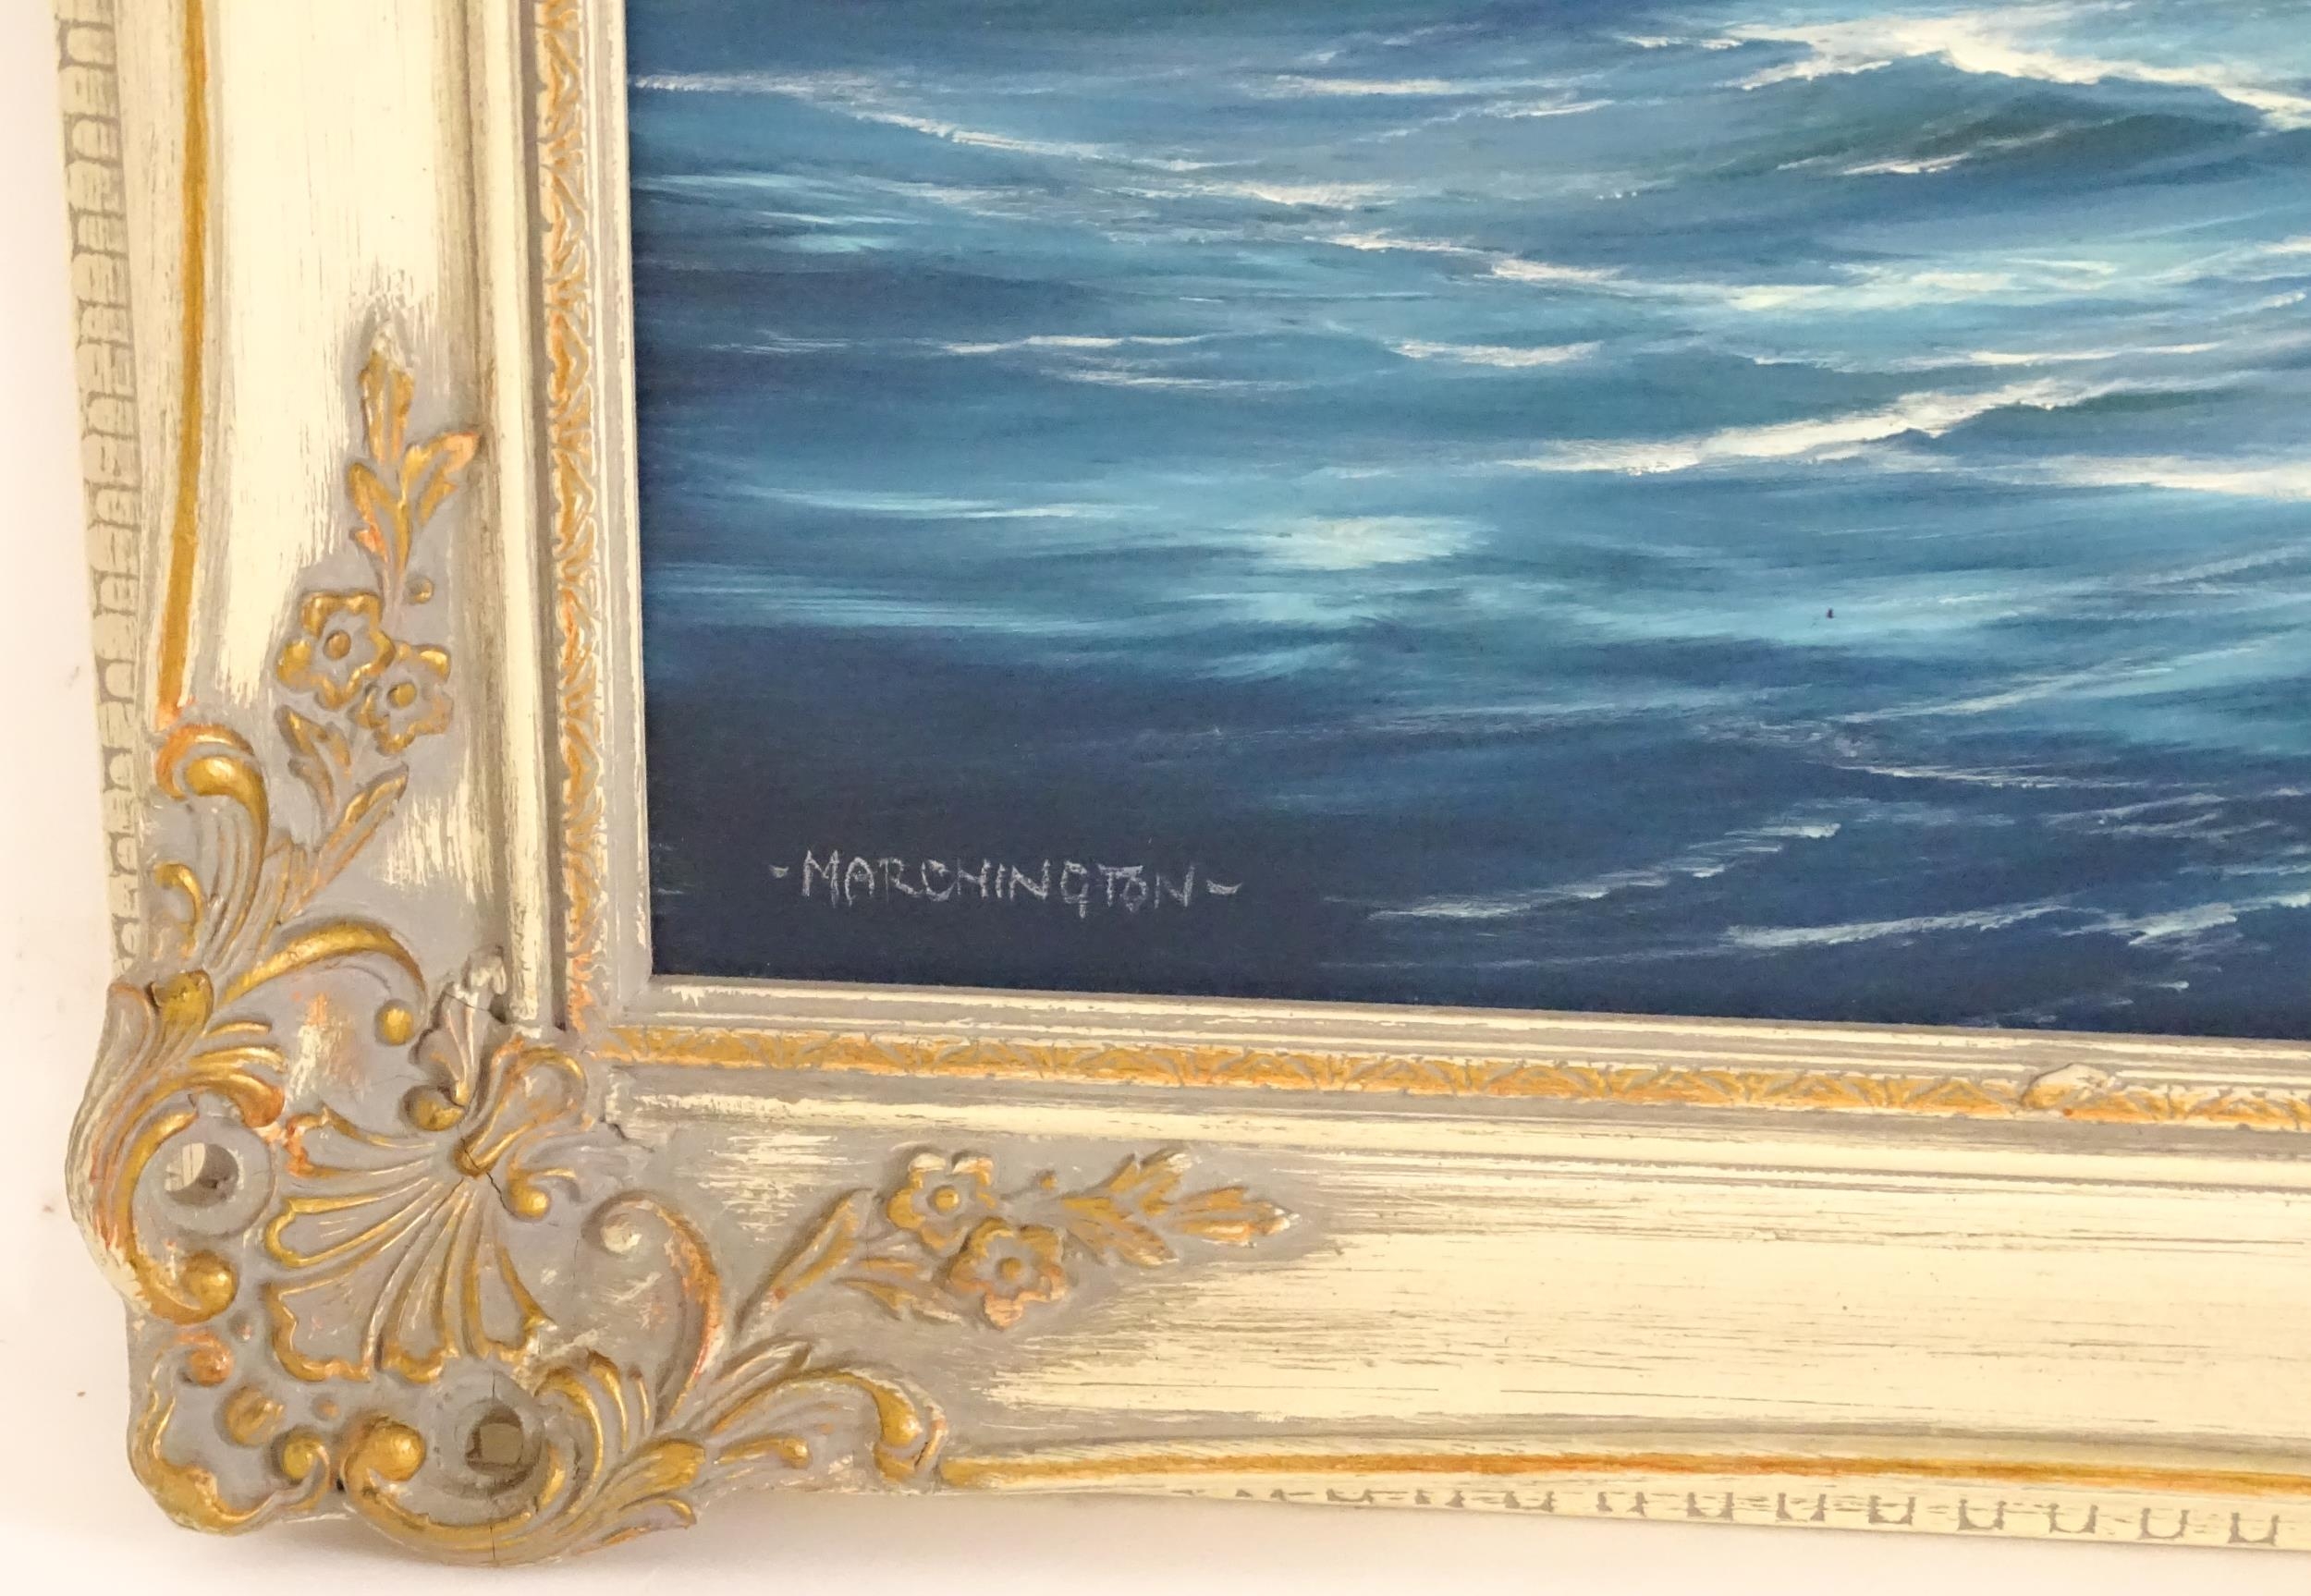 Philip Marchington, 20th century, Oil on canvas, A tall ship off the coast. Signed lower left. - Image 4 of 4